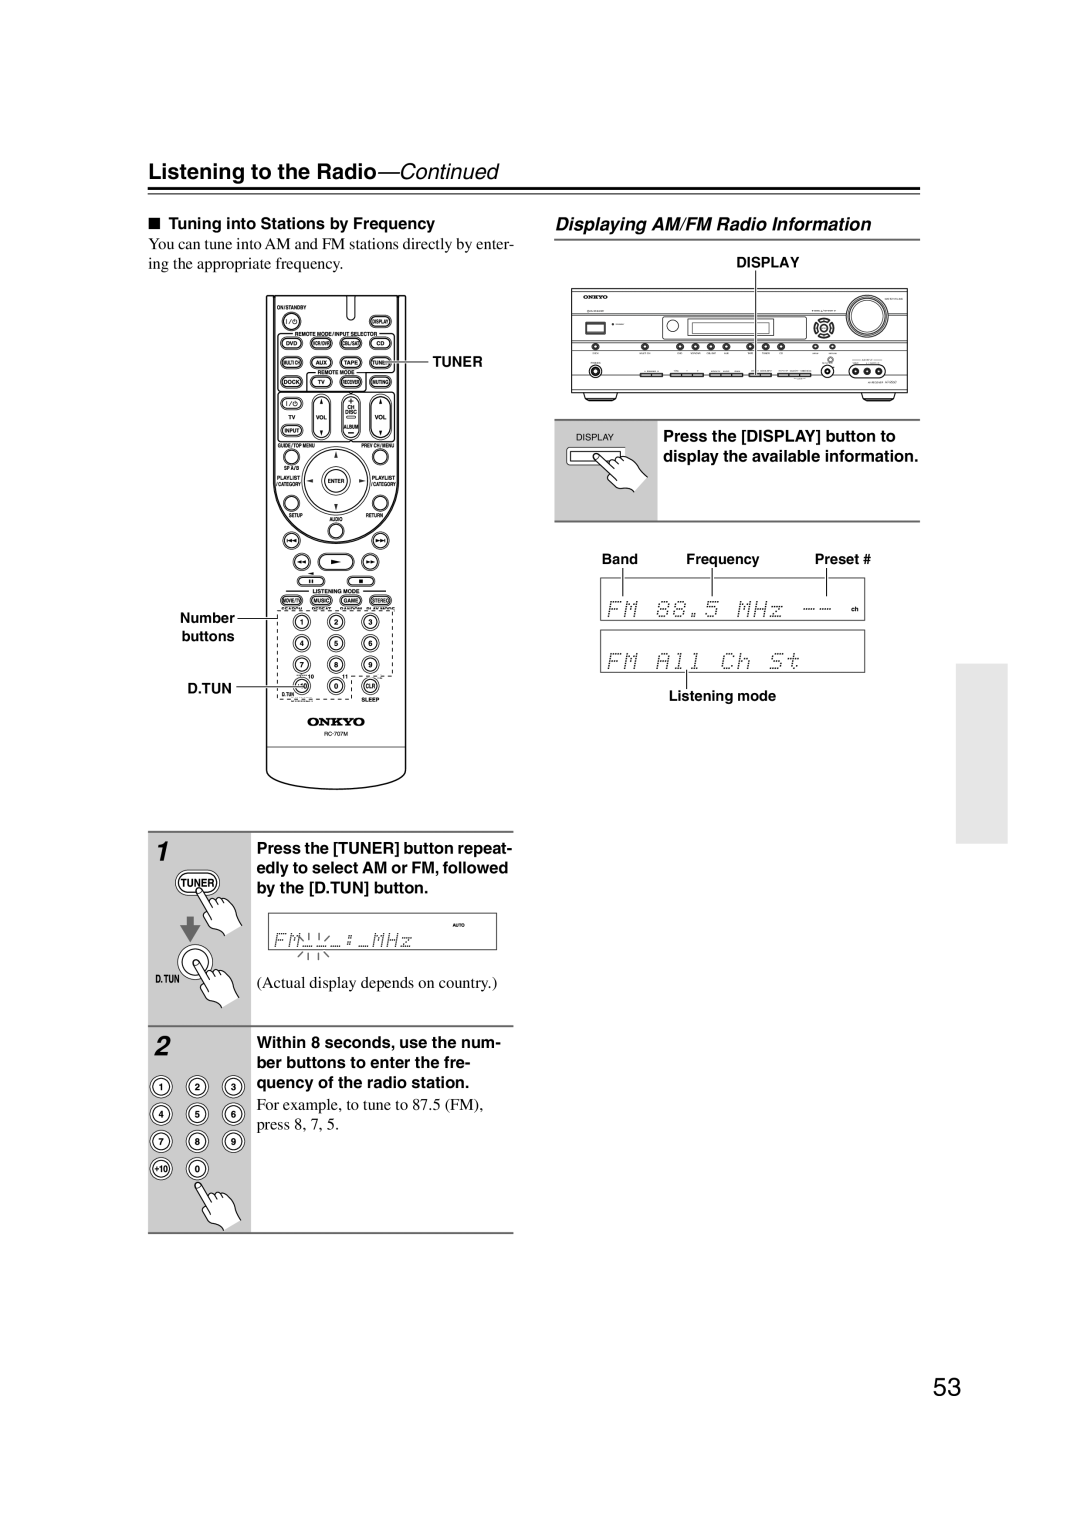 Onkyo HT-S5100 instruction manual Displaying AM/FM Radio Information, Listening to the Radio—Continued 